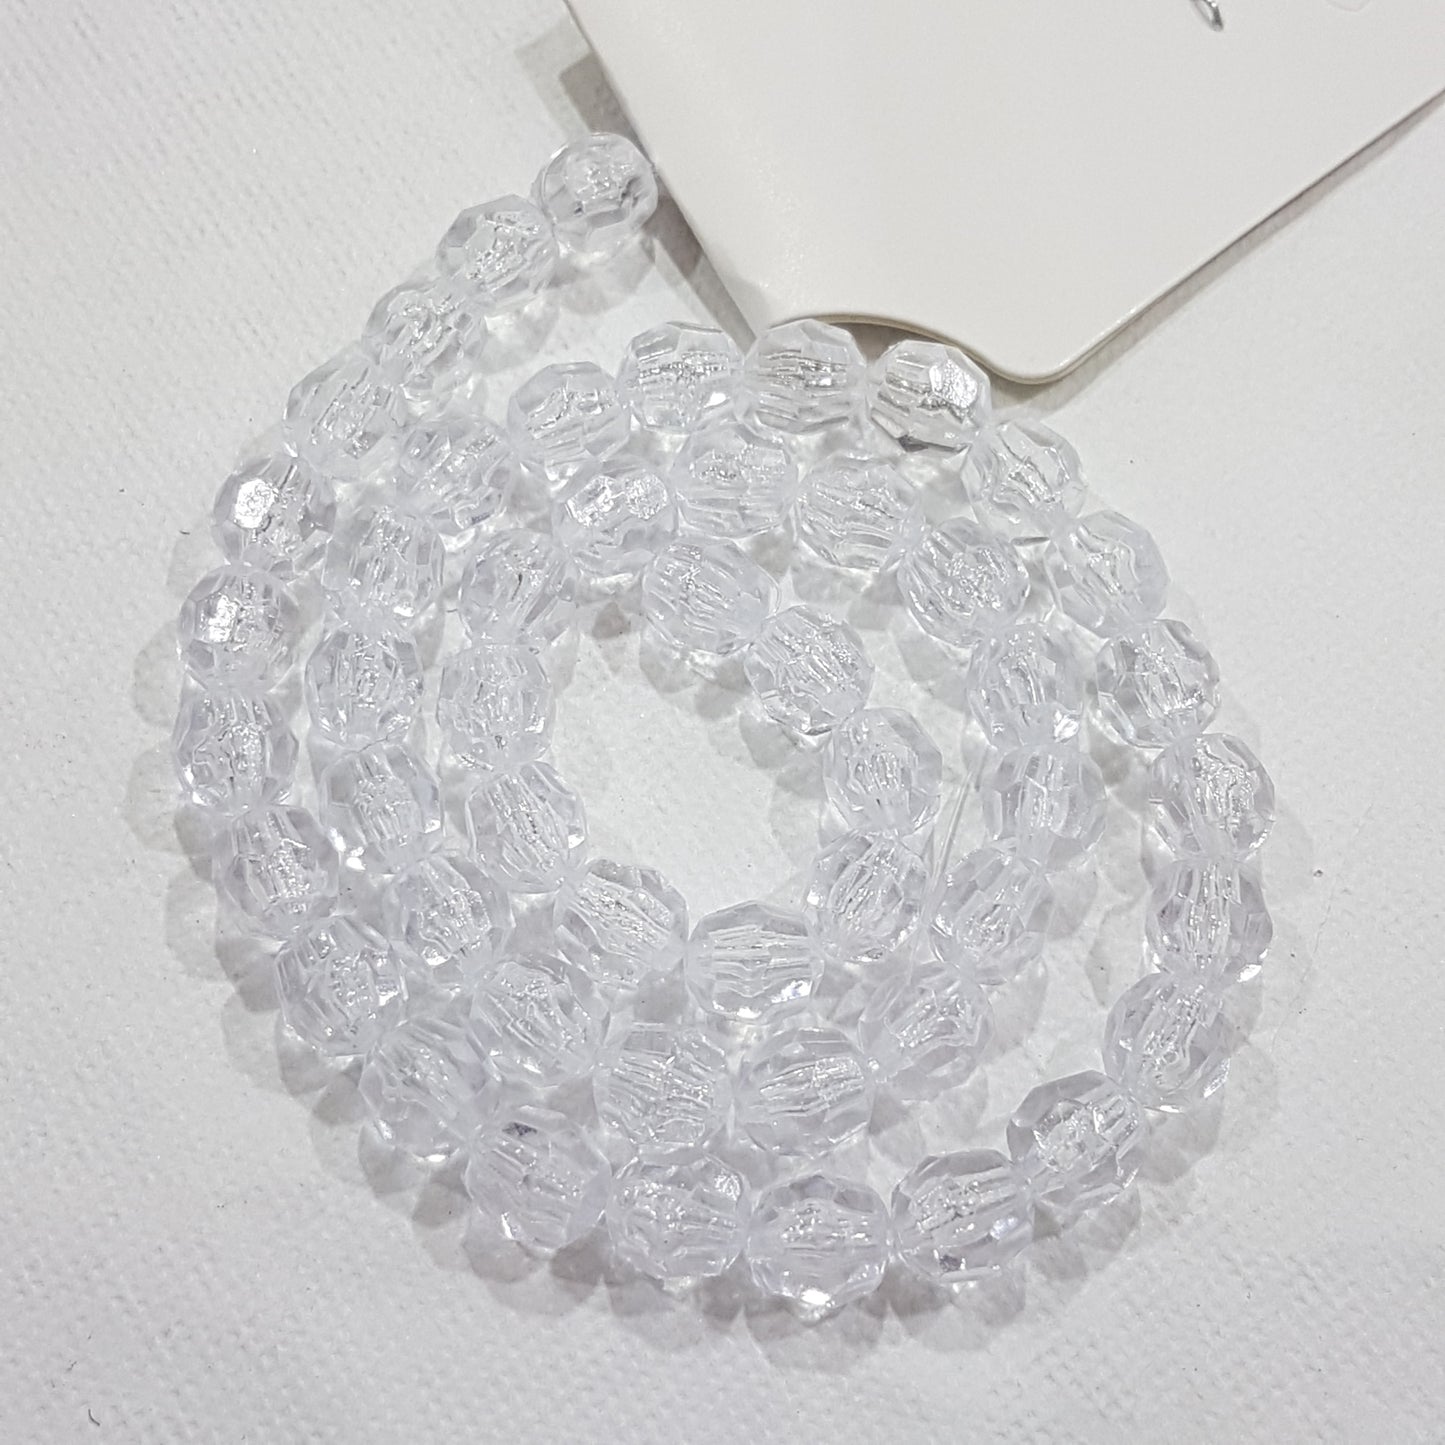 50pc Clear Faceted Acrylic Beads